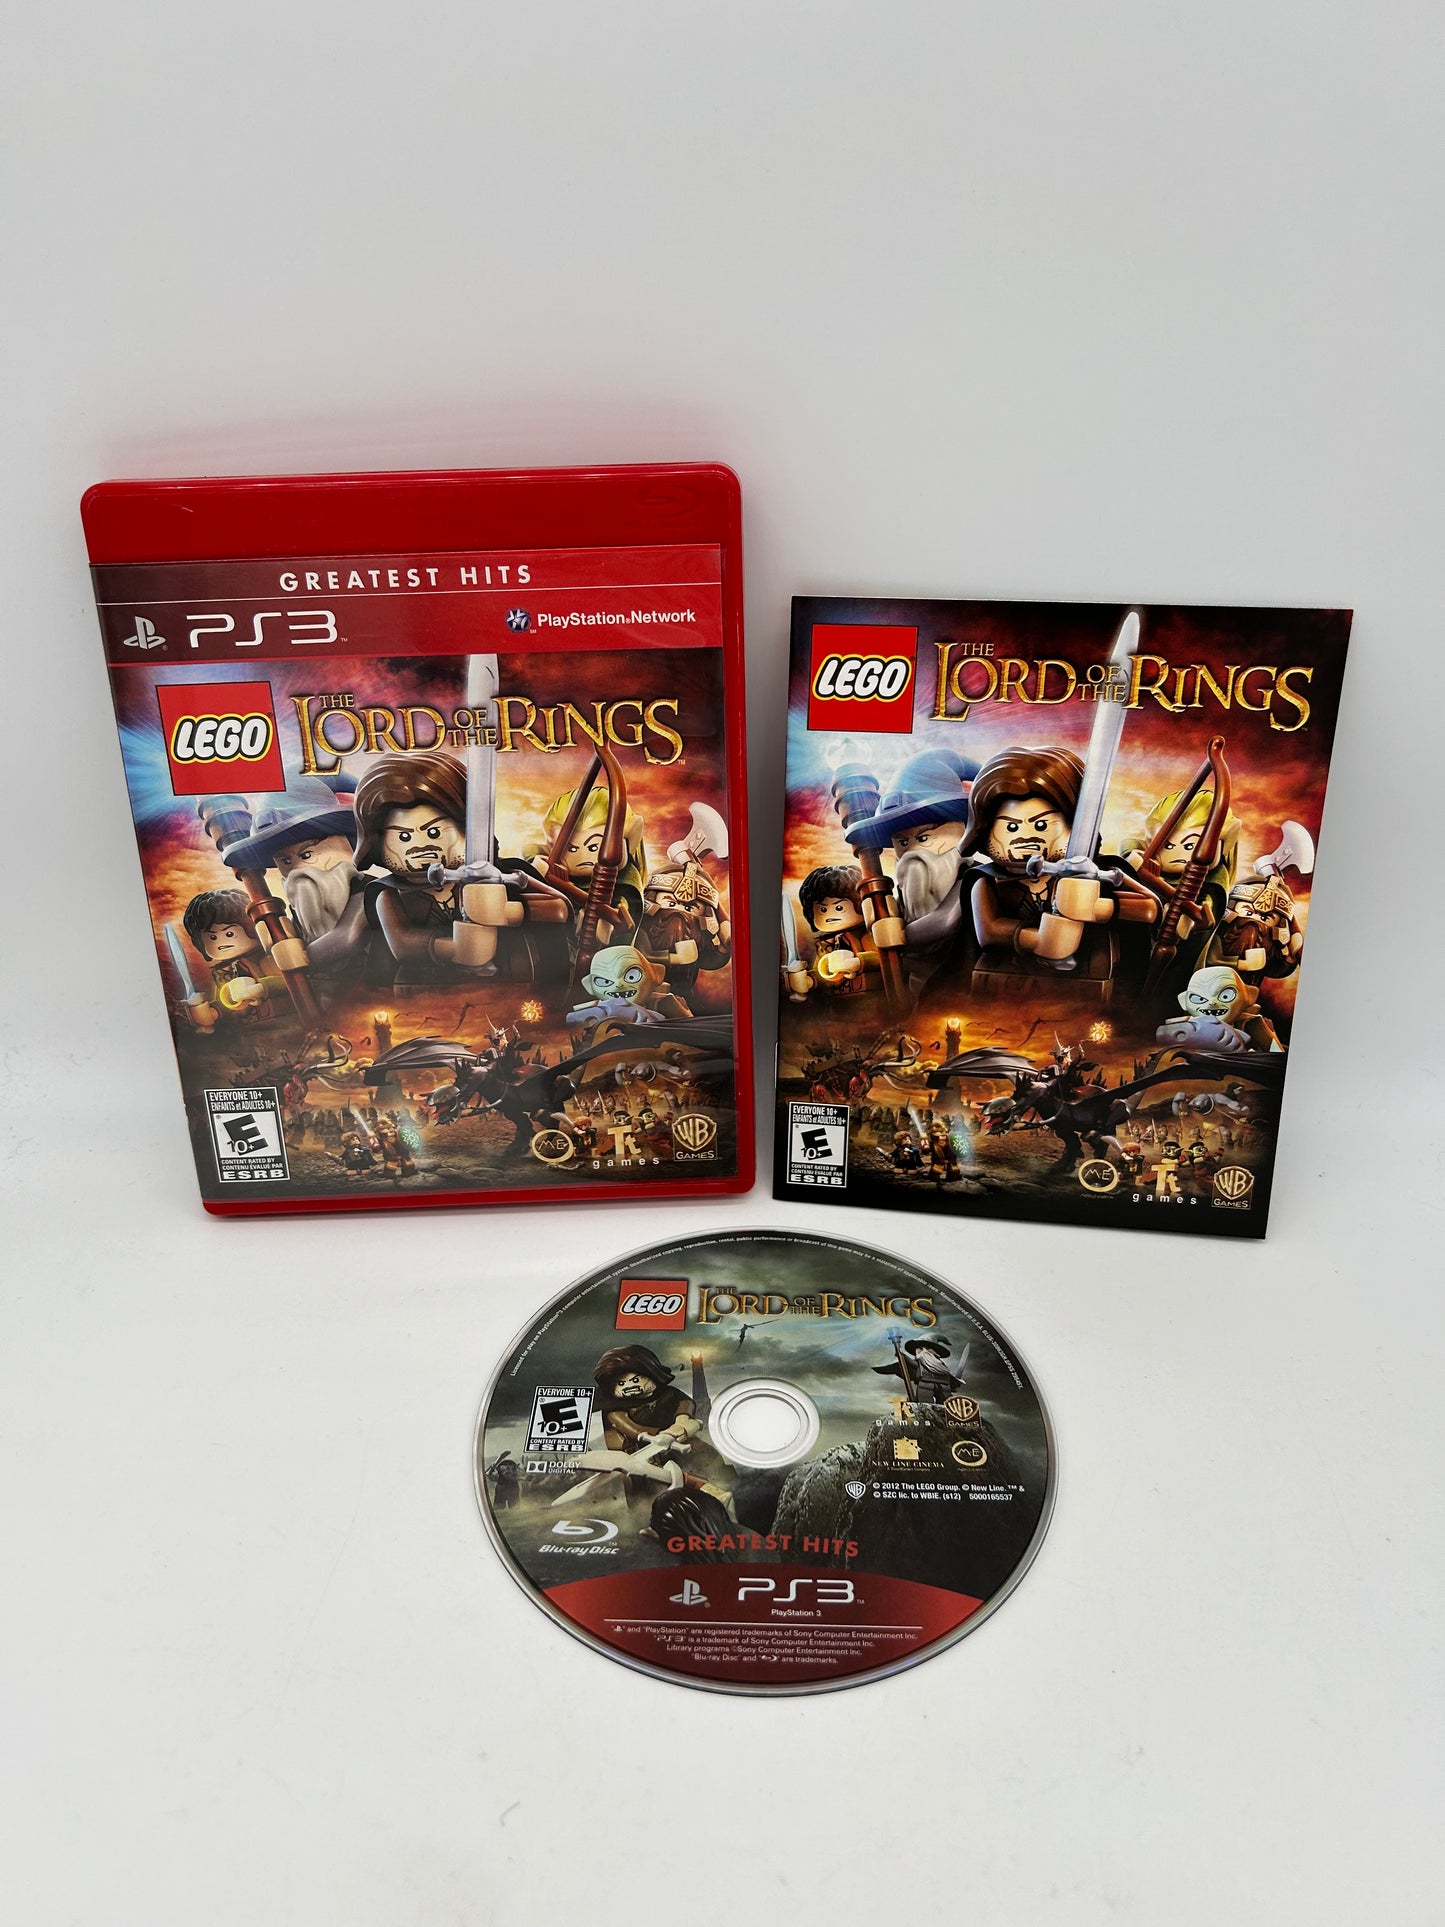 PiXEL-RETRO.COM : SONY PLAYSTATION 3 (PS3) COMPLET CIB BOX MANUAL GAME NTSC LEGO THE LORD OF THE RINGS